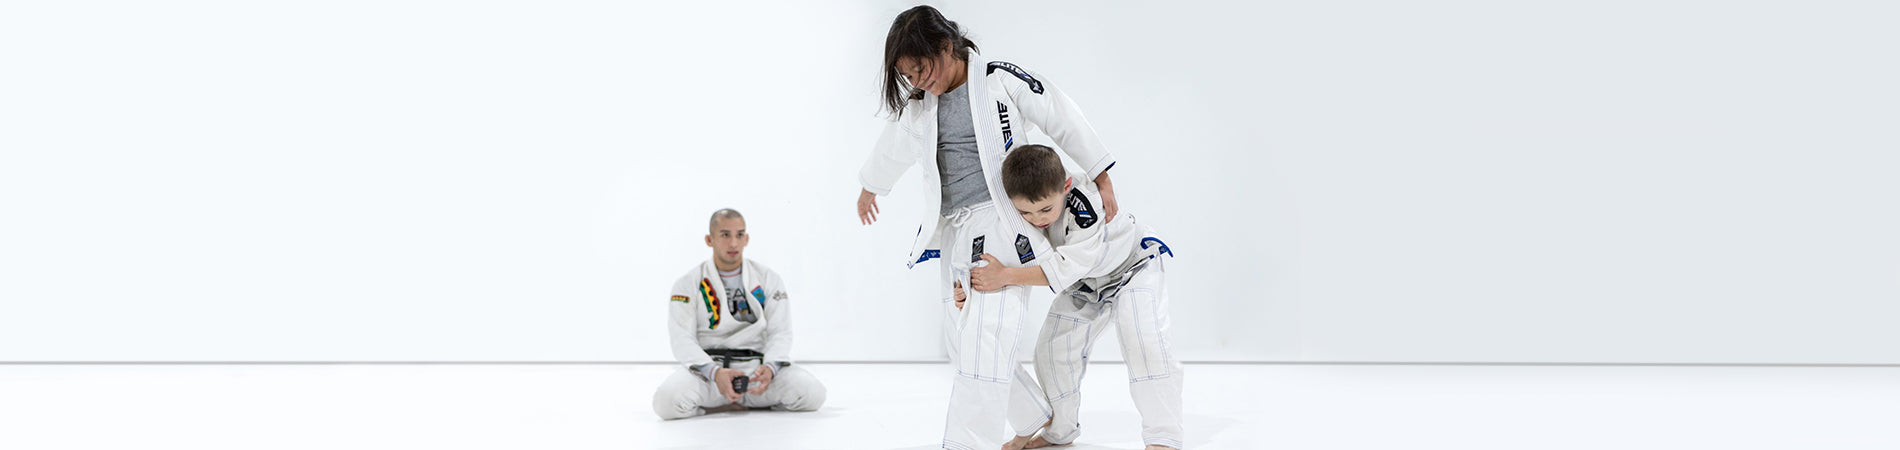 Reasons Why Kids Want To Quit BJJ